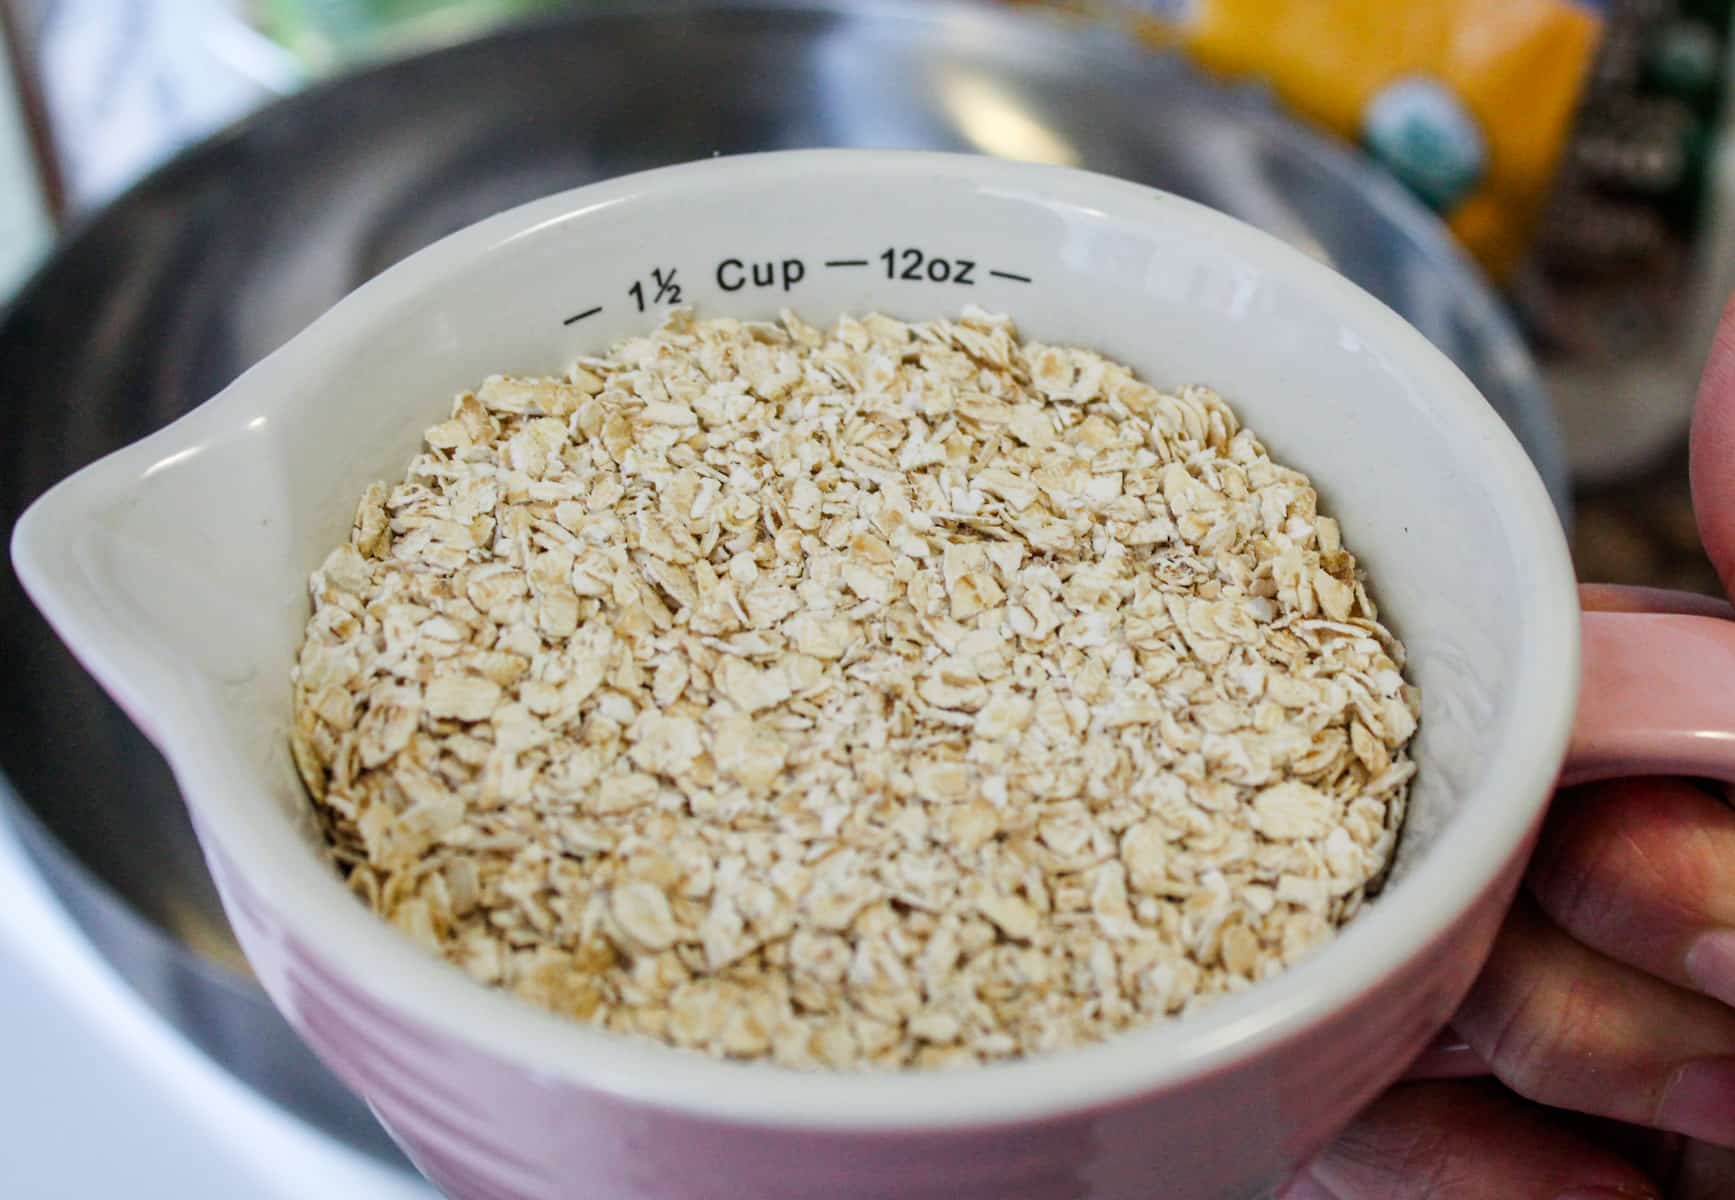 a measuring cup of oats.